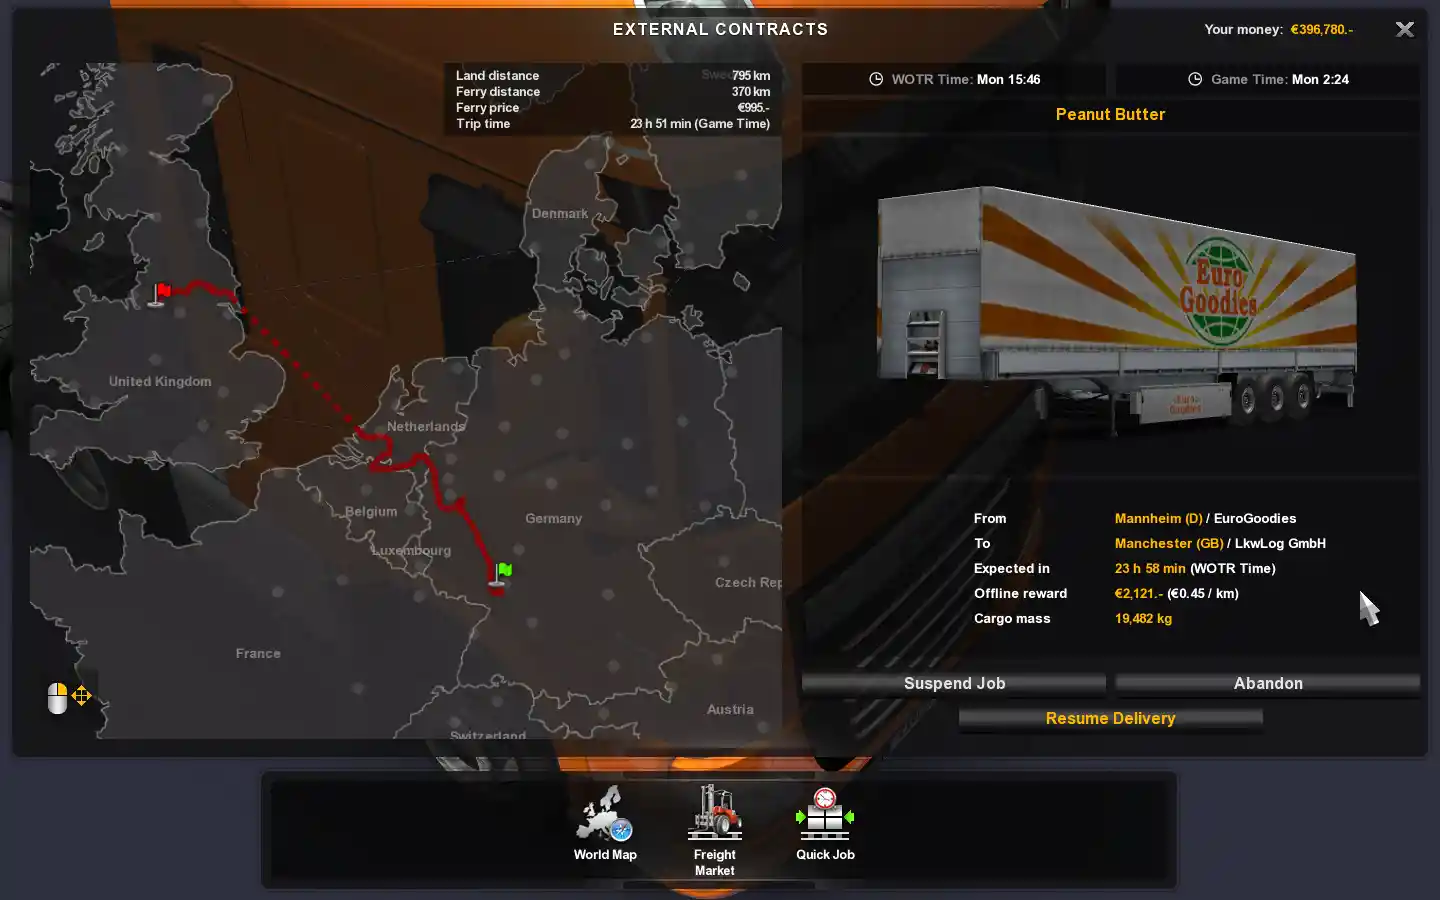 Ets2-blog_20151027_Wot_contracts_ingame.jpg